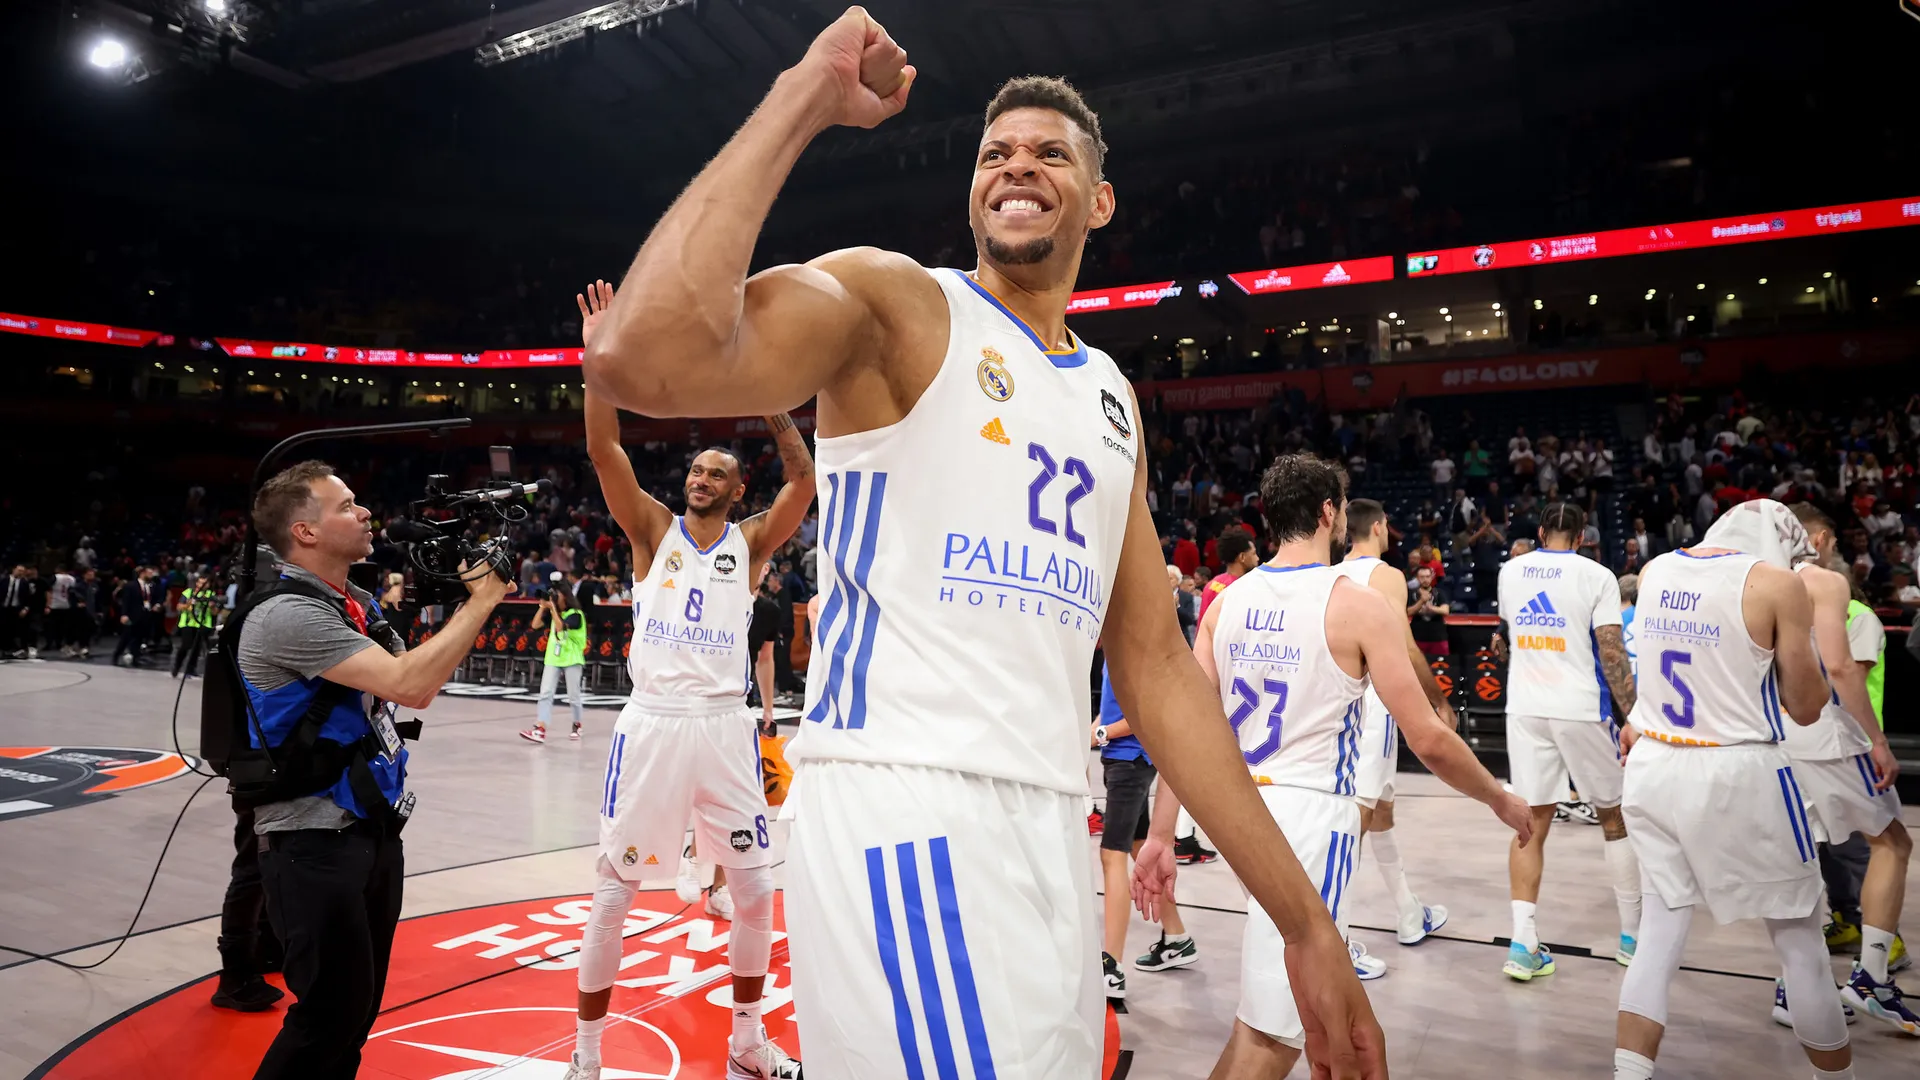 Real Madrid reaches Euroleague final after thriller against arch-rival Barcelona